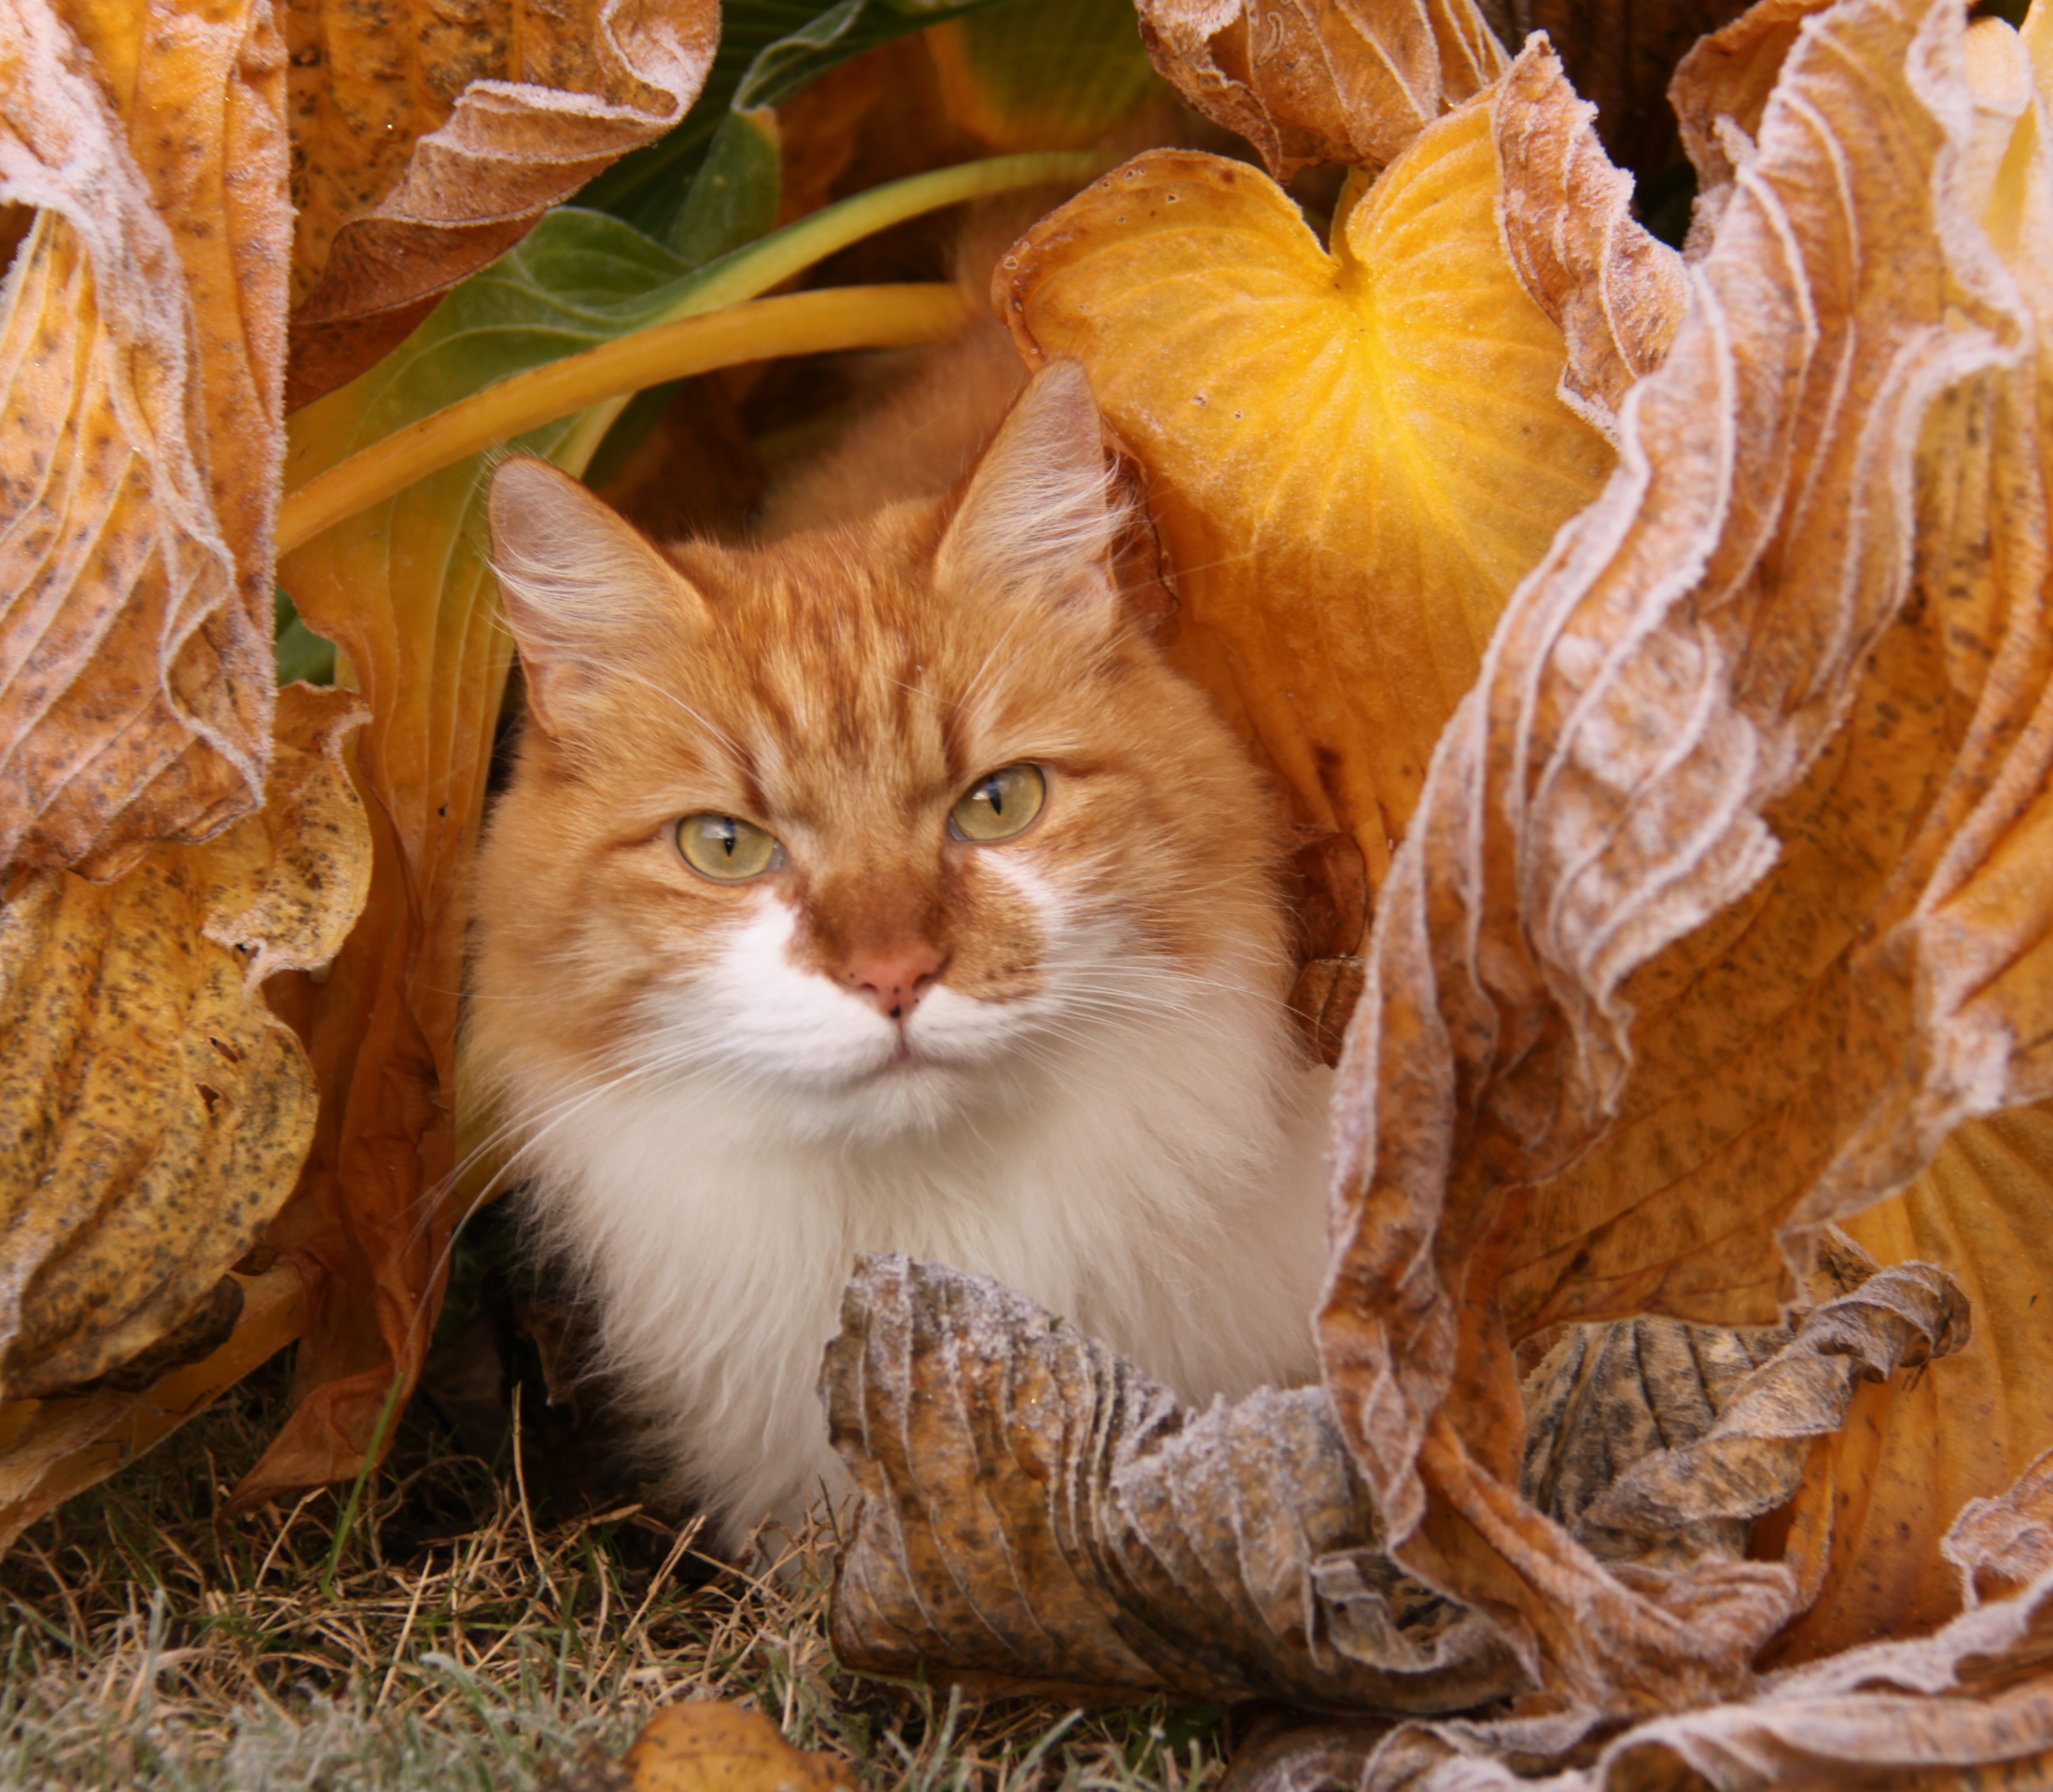 Ginger cat around some fallen dried leaves